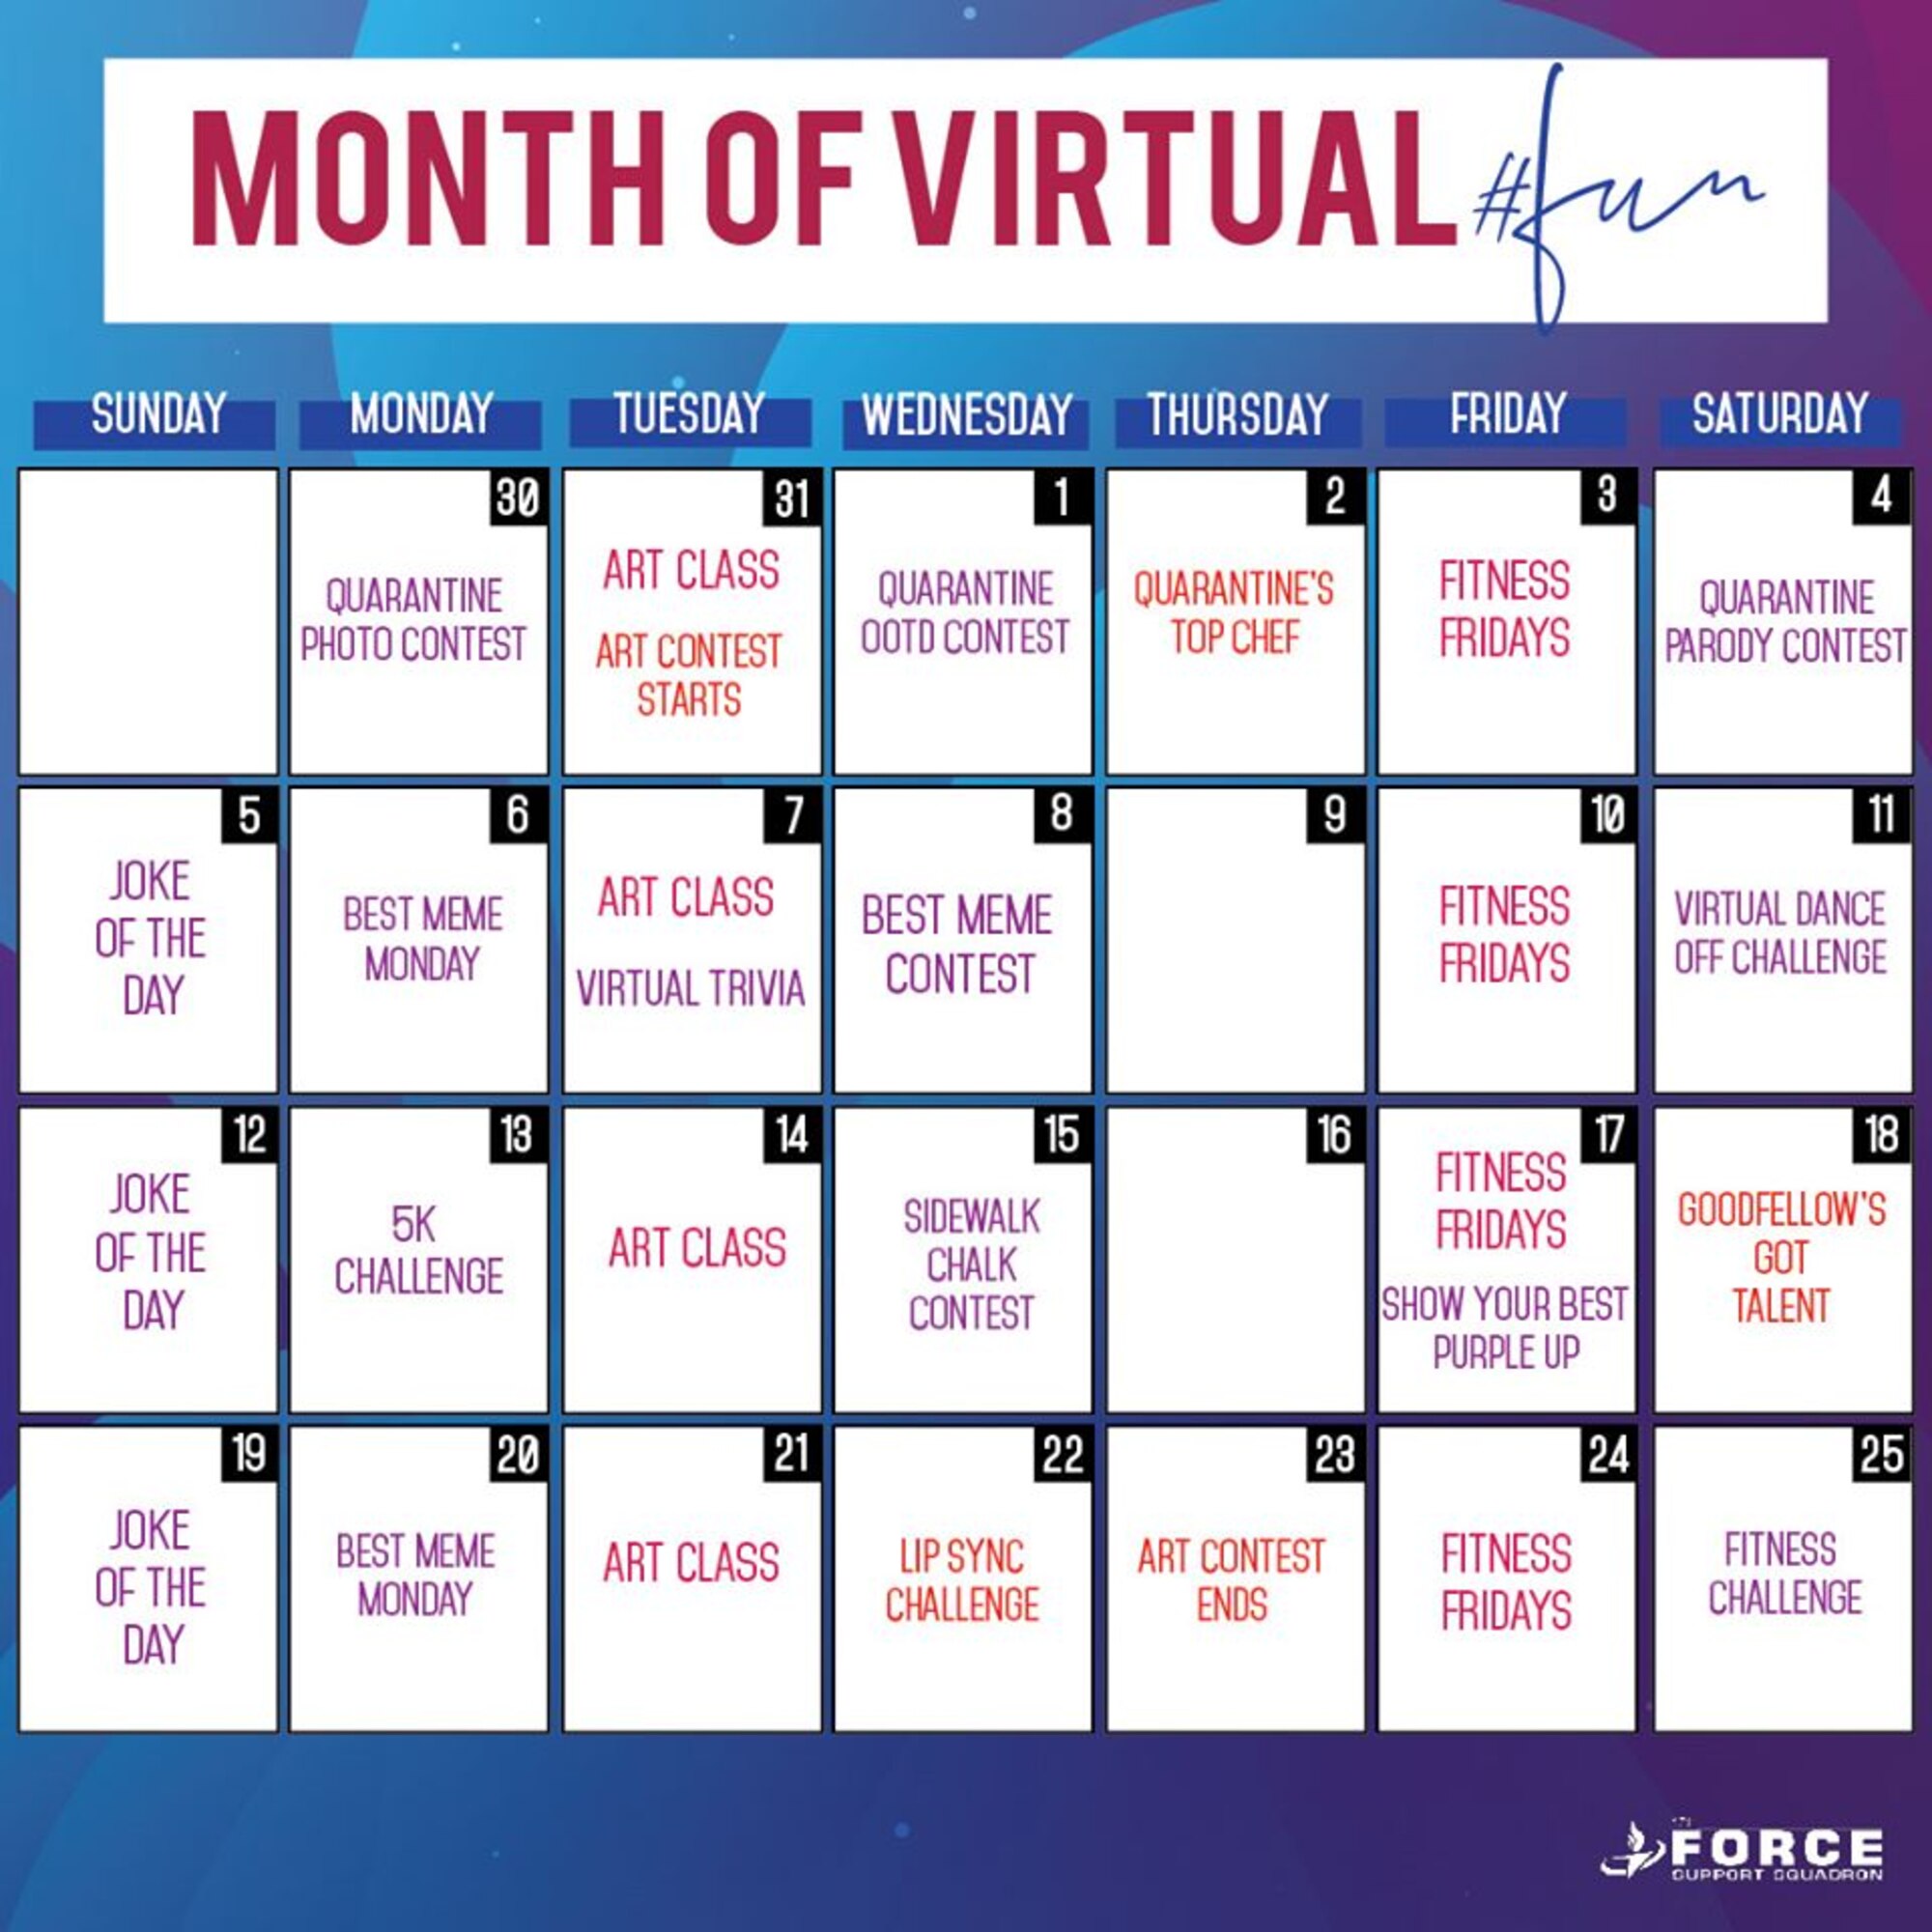 Courtesy graphic of the upcoming Month of Virtual #fun event.